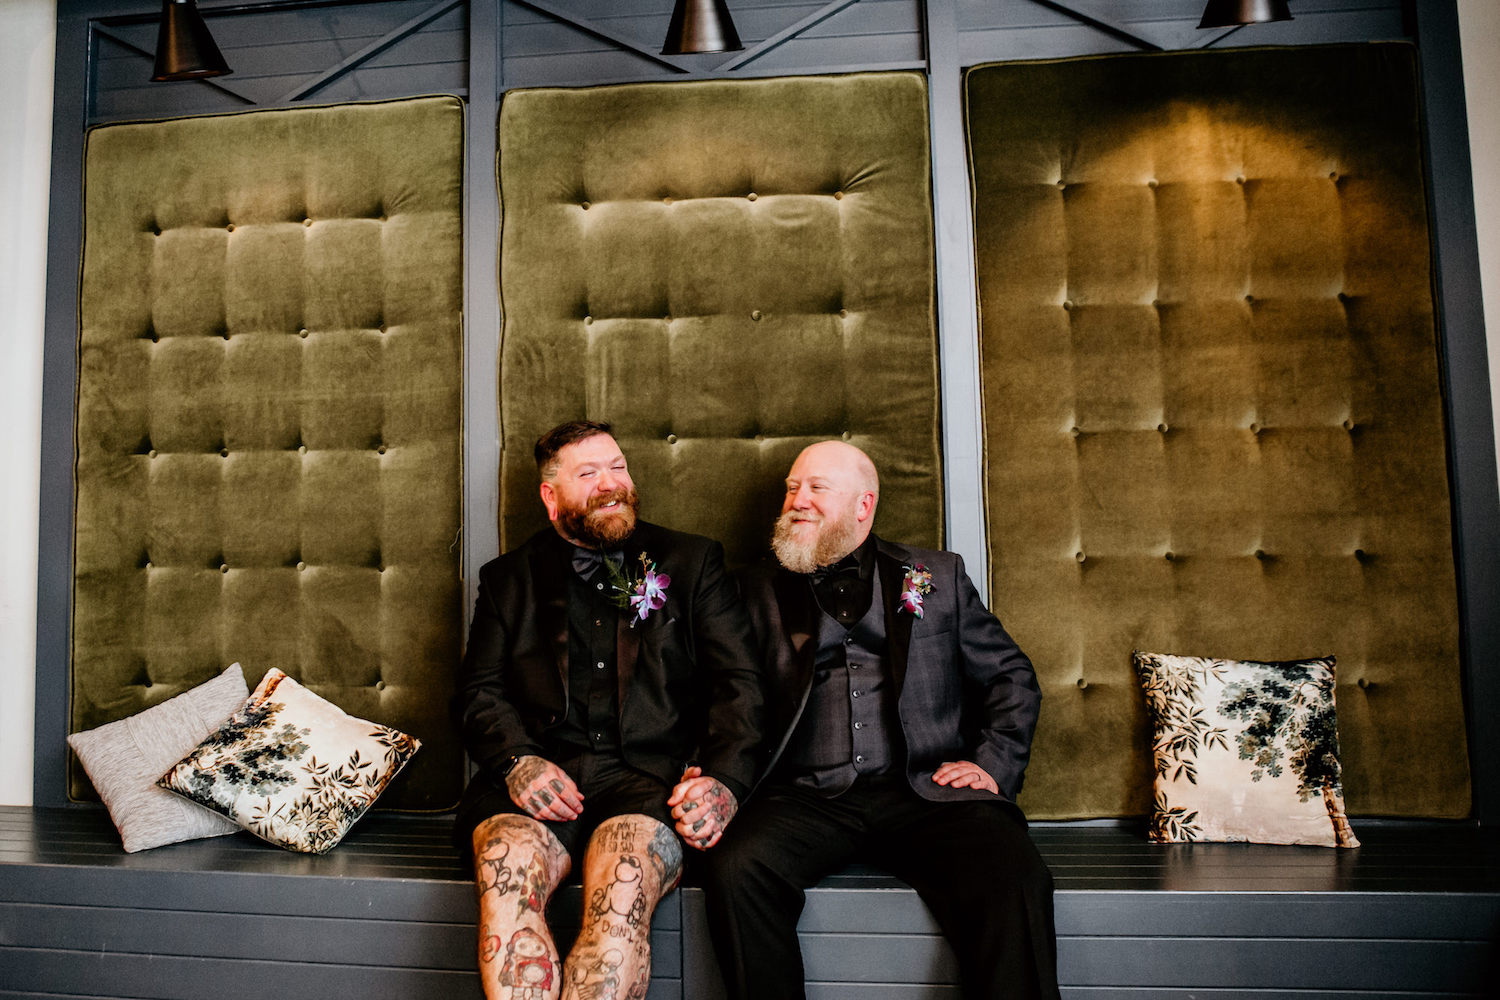 Same Sex Tampa Gay Grooms in Tuxedo and Shorts with Tattoos Wedding Portrait | St. Pete Unique Wedding Venue Station House